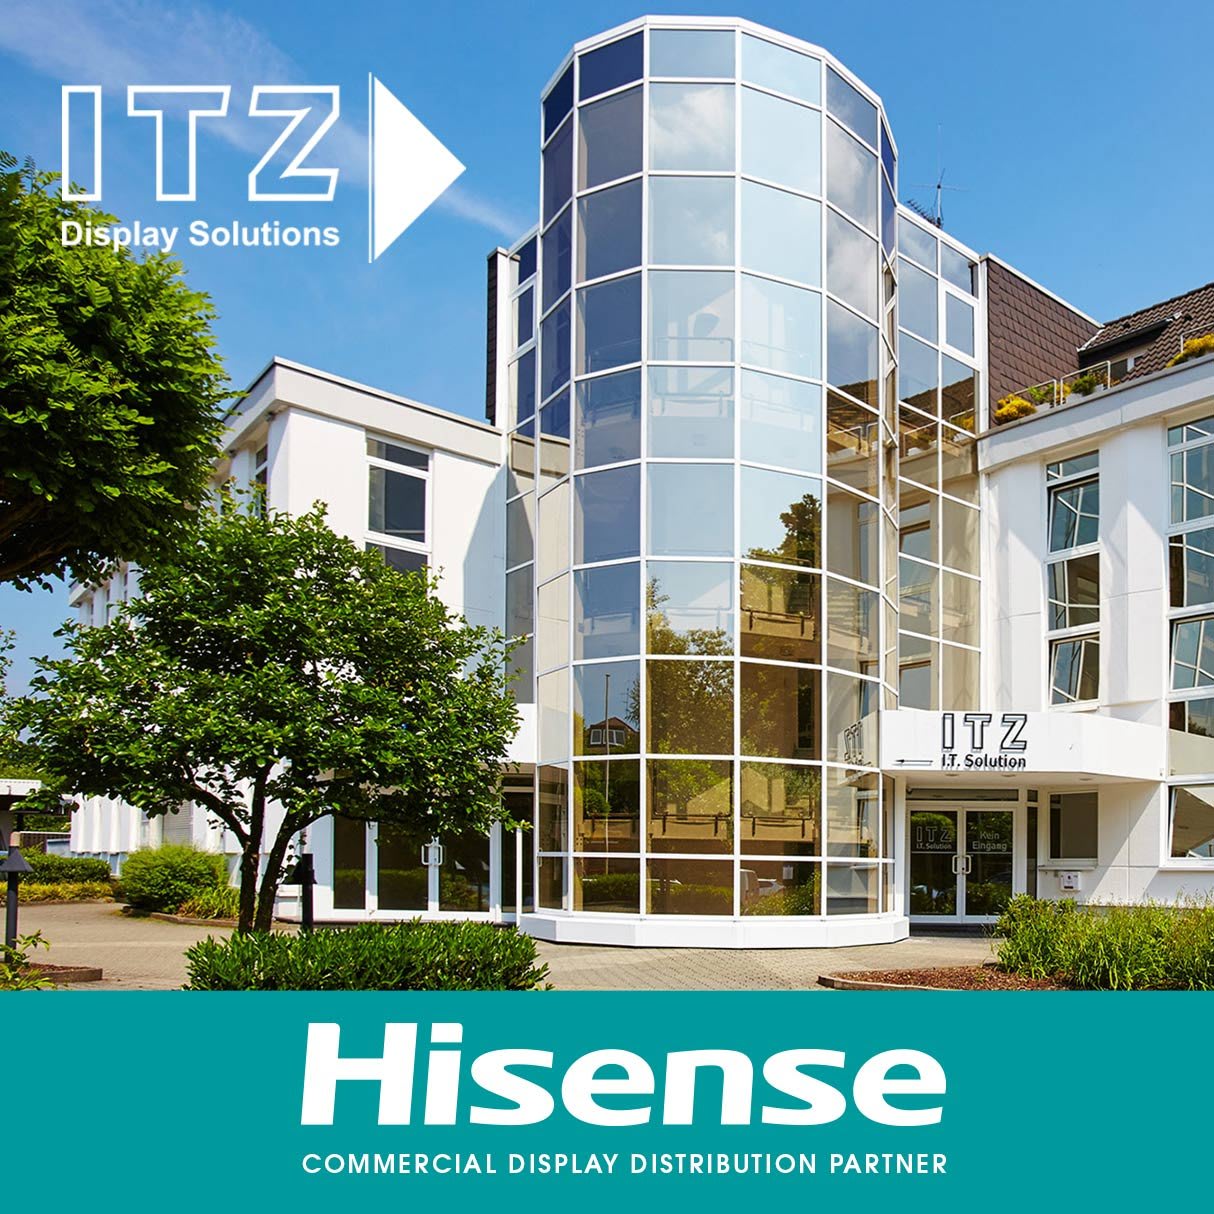 Hisense B2B Europe is expanding into the German digital signage market with full-service distributor ITZ